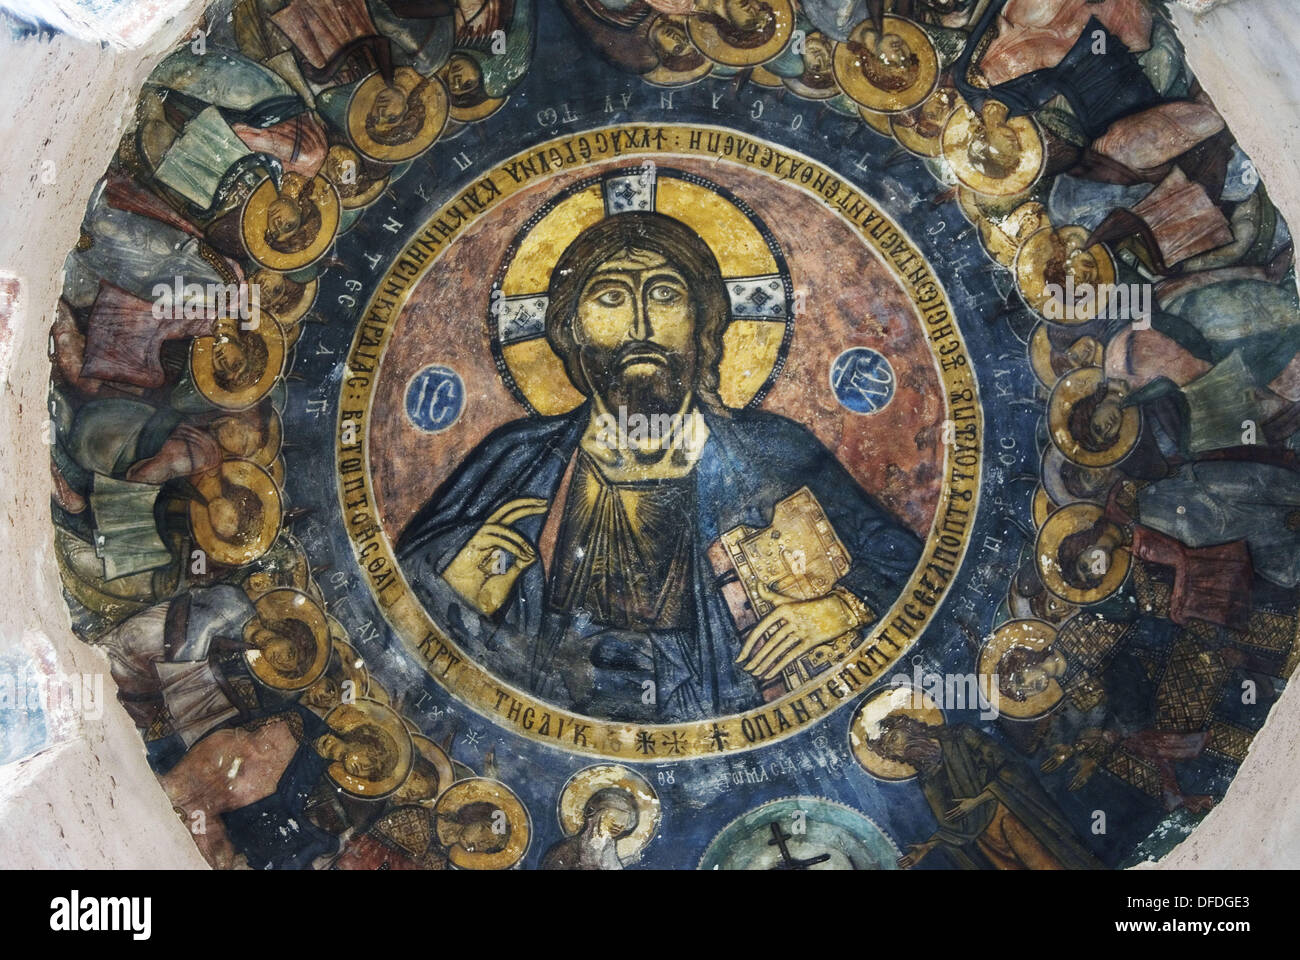 Icon Museum housed in the Panayia Theodokou Church, Iskele, Cyprus Stock Photo